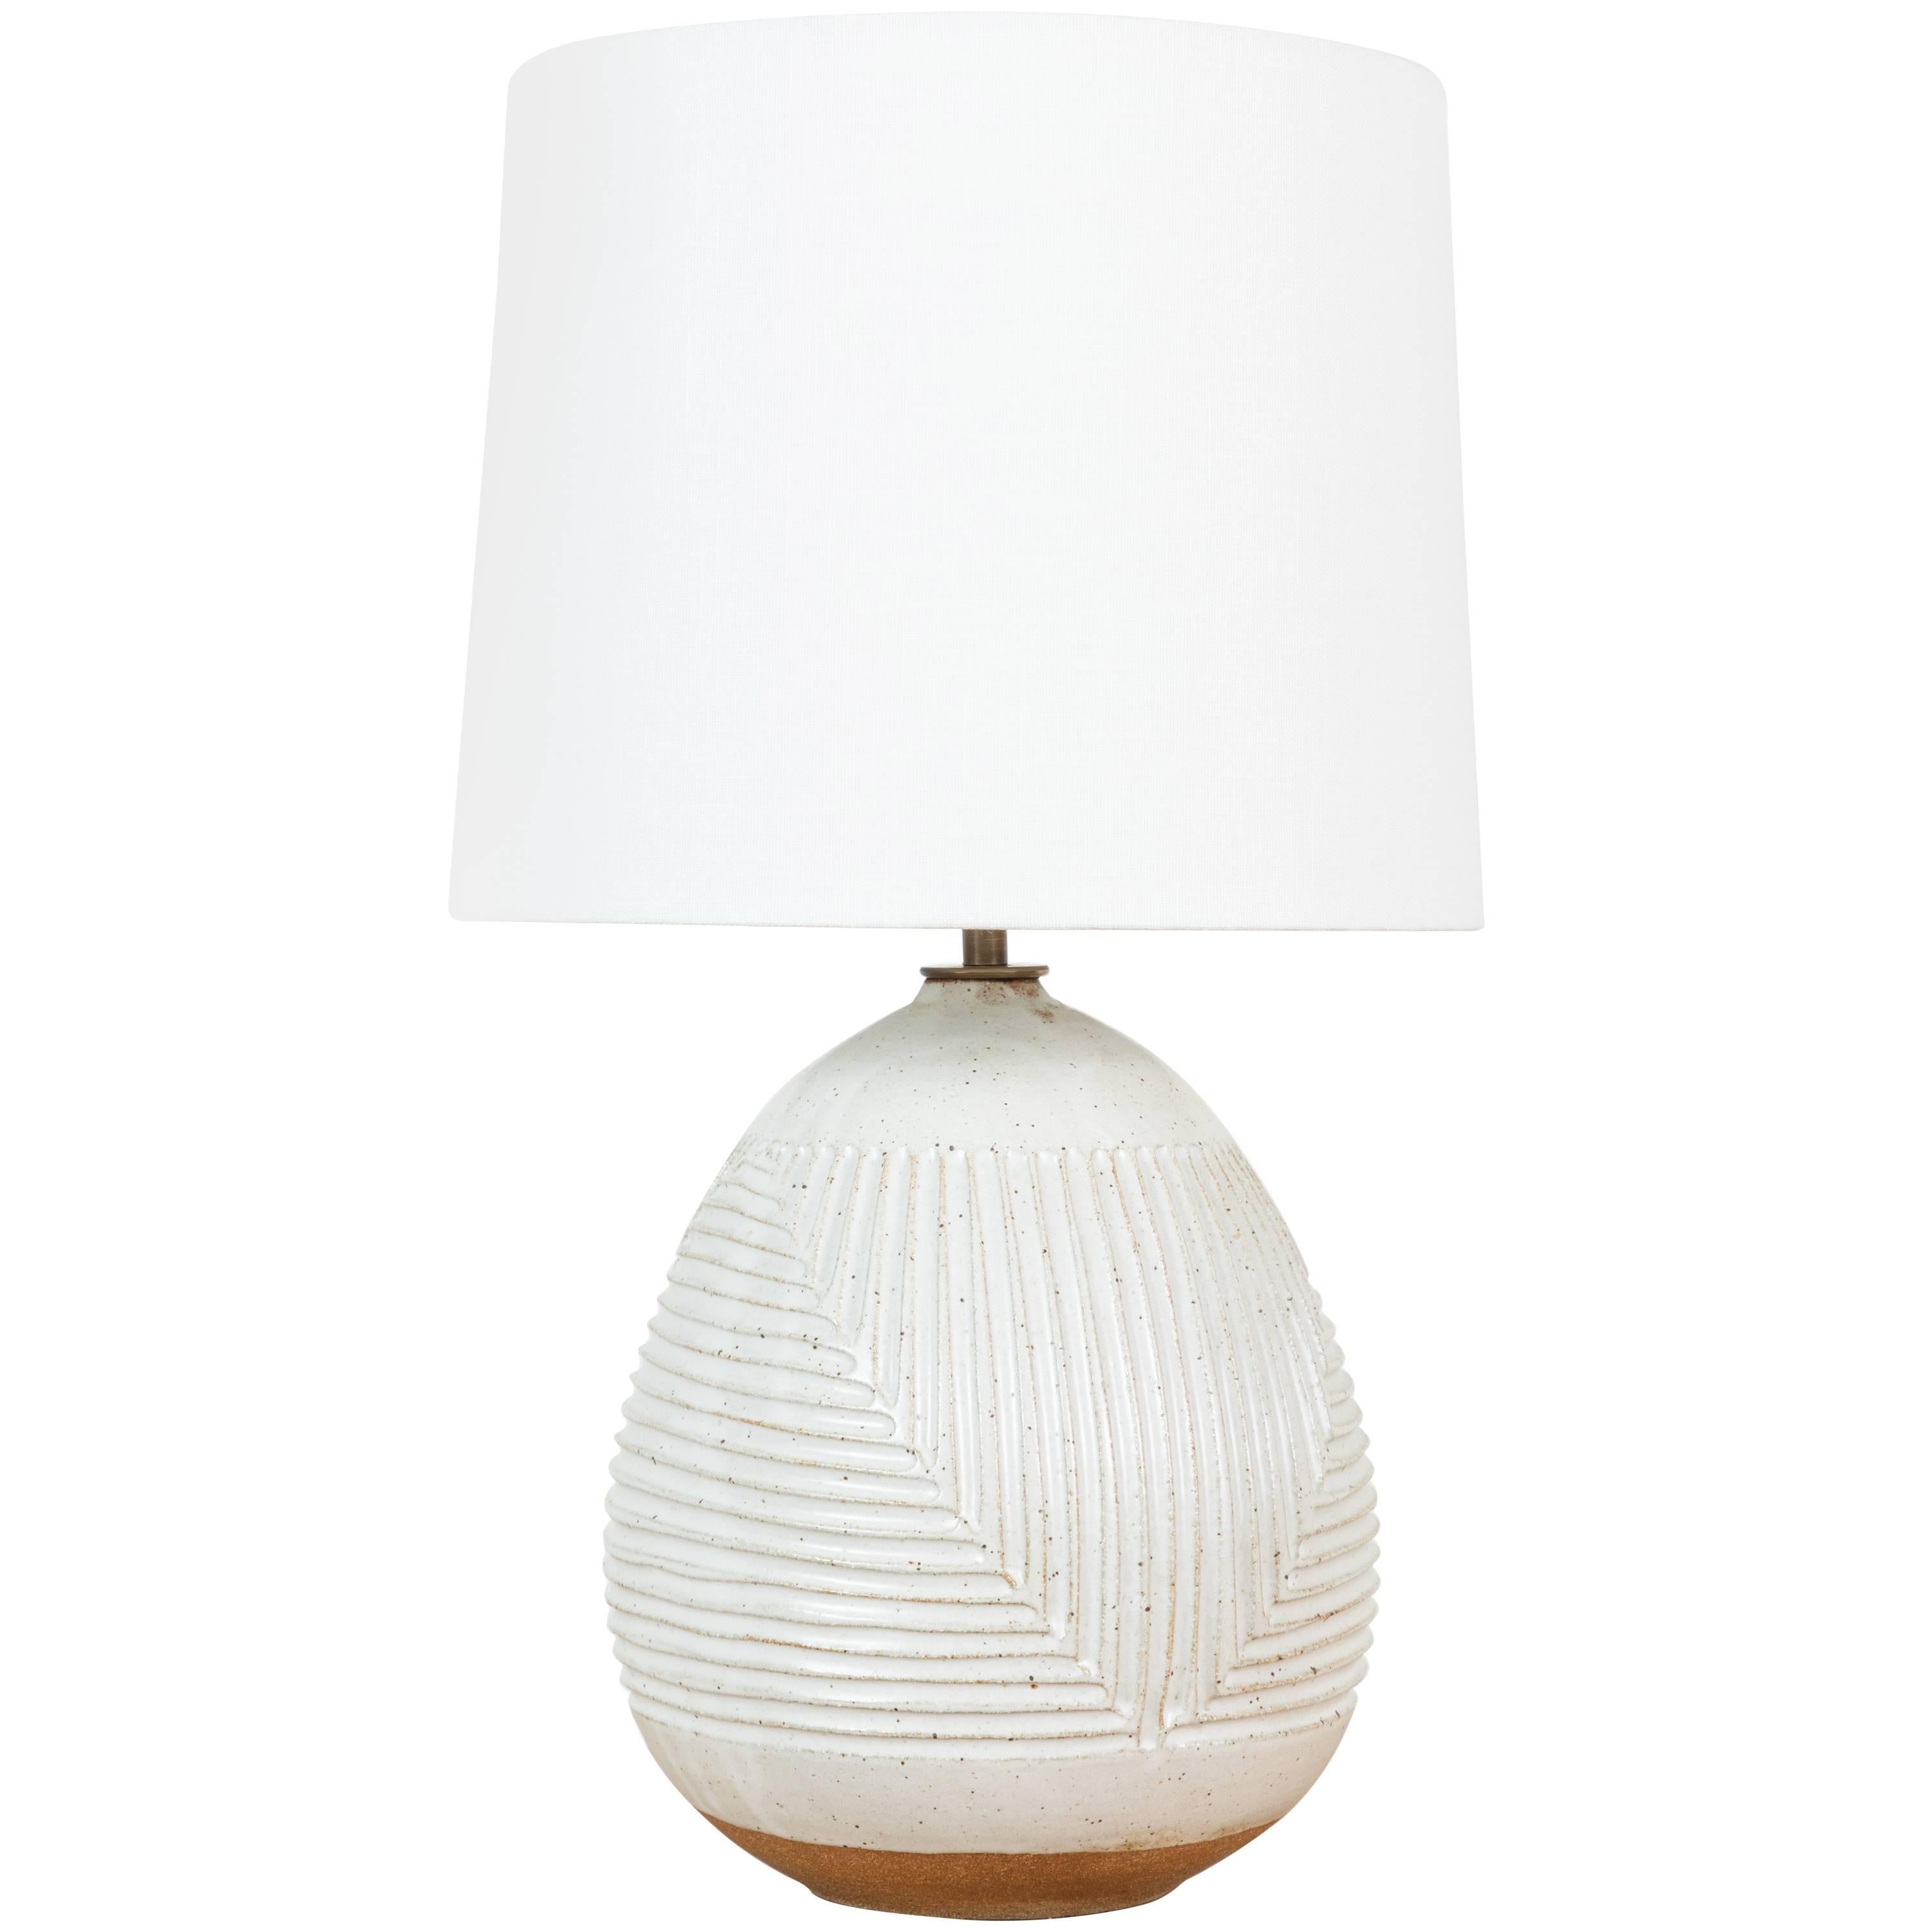 Hand-Carved Ceramic Table Lamp by Mt. Washington Pottery